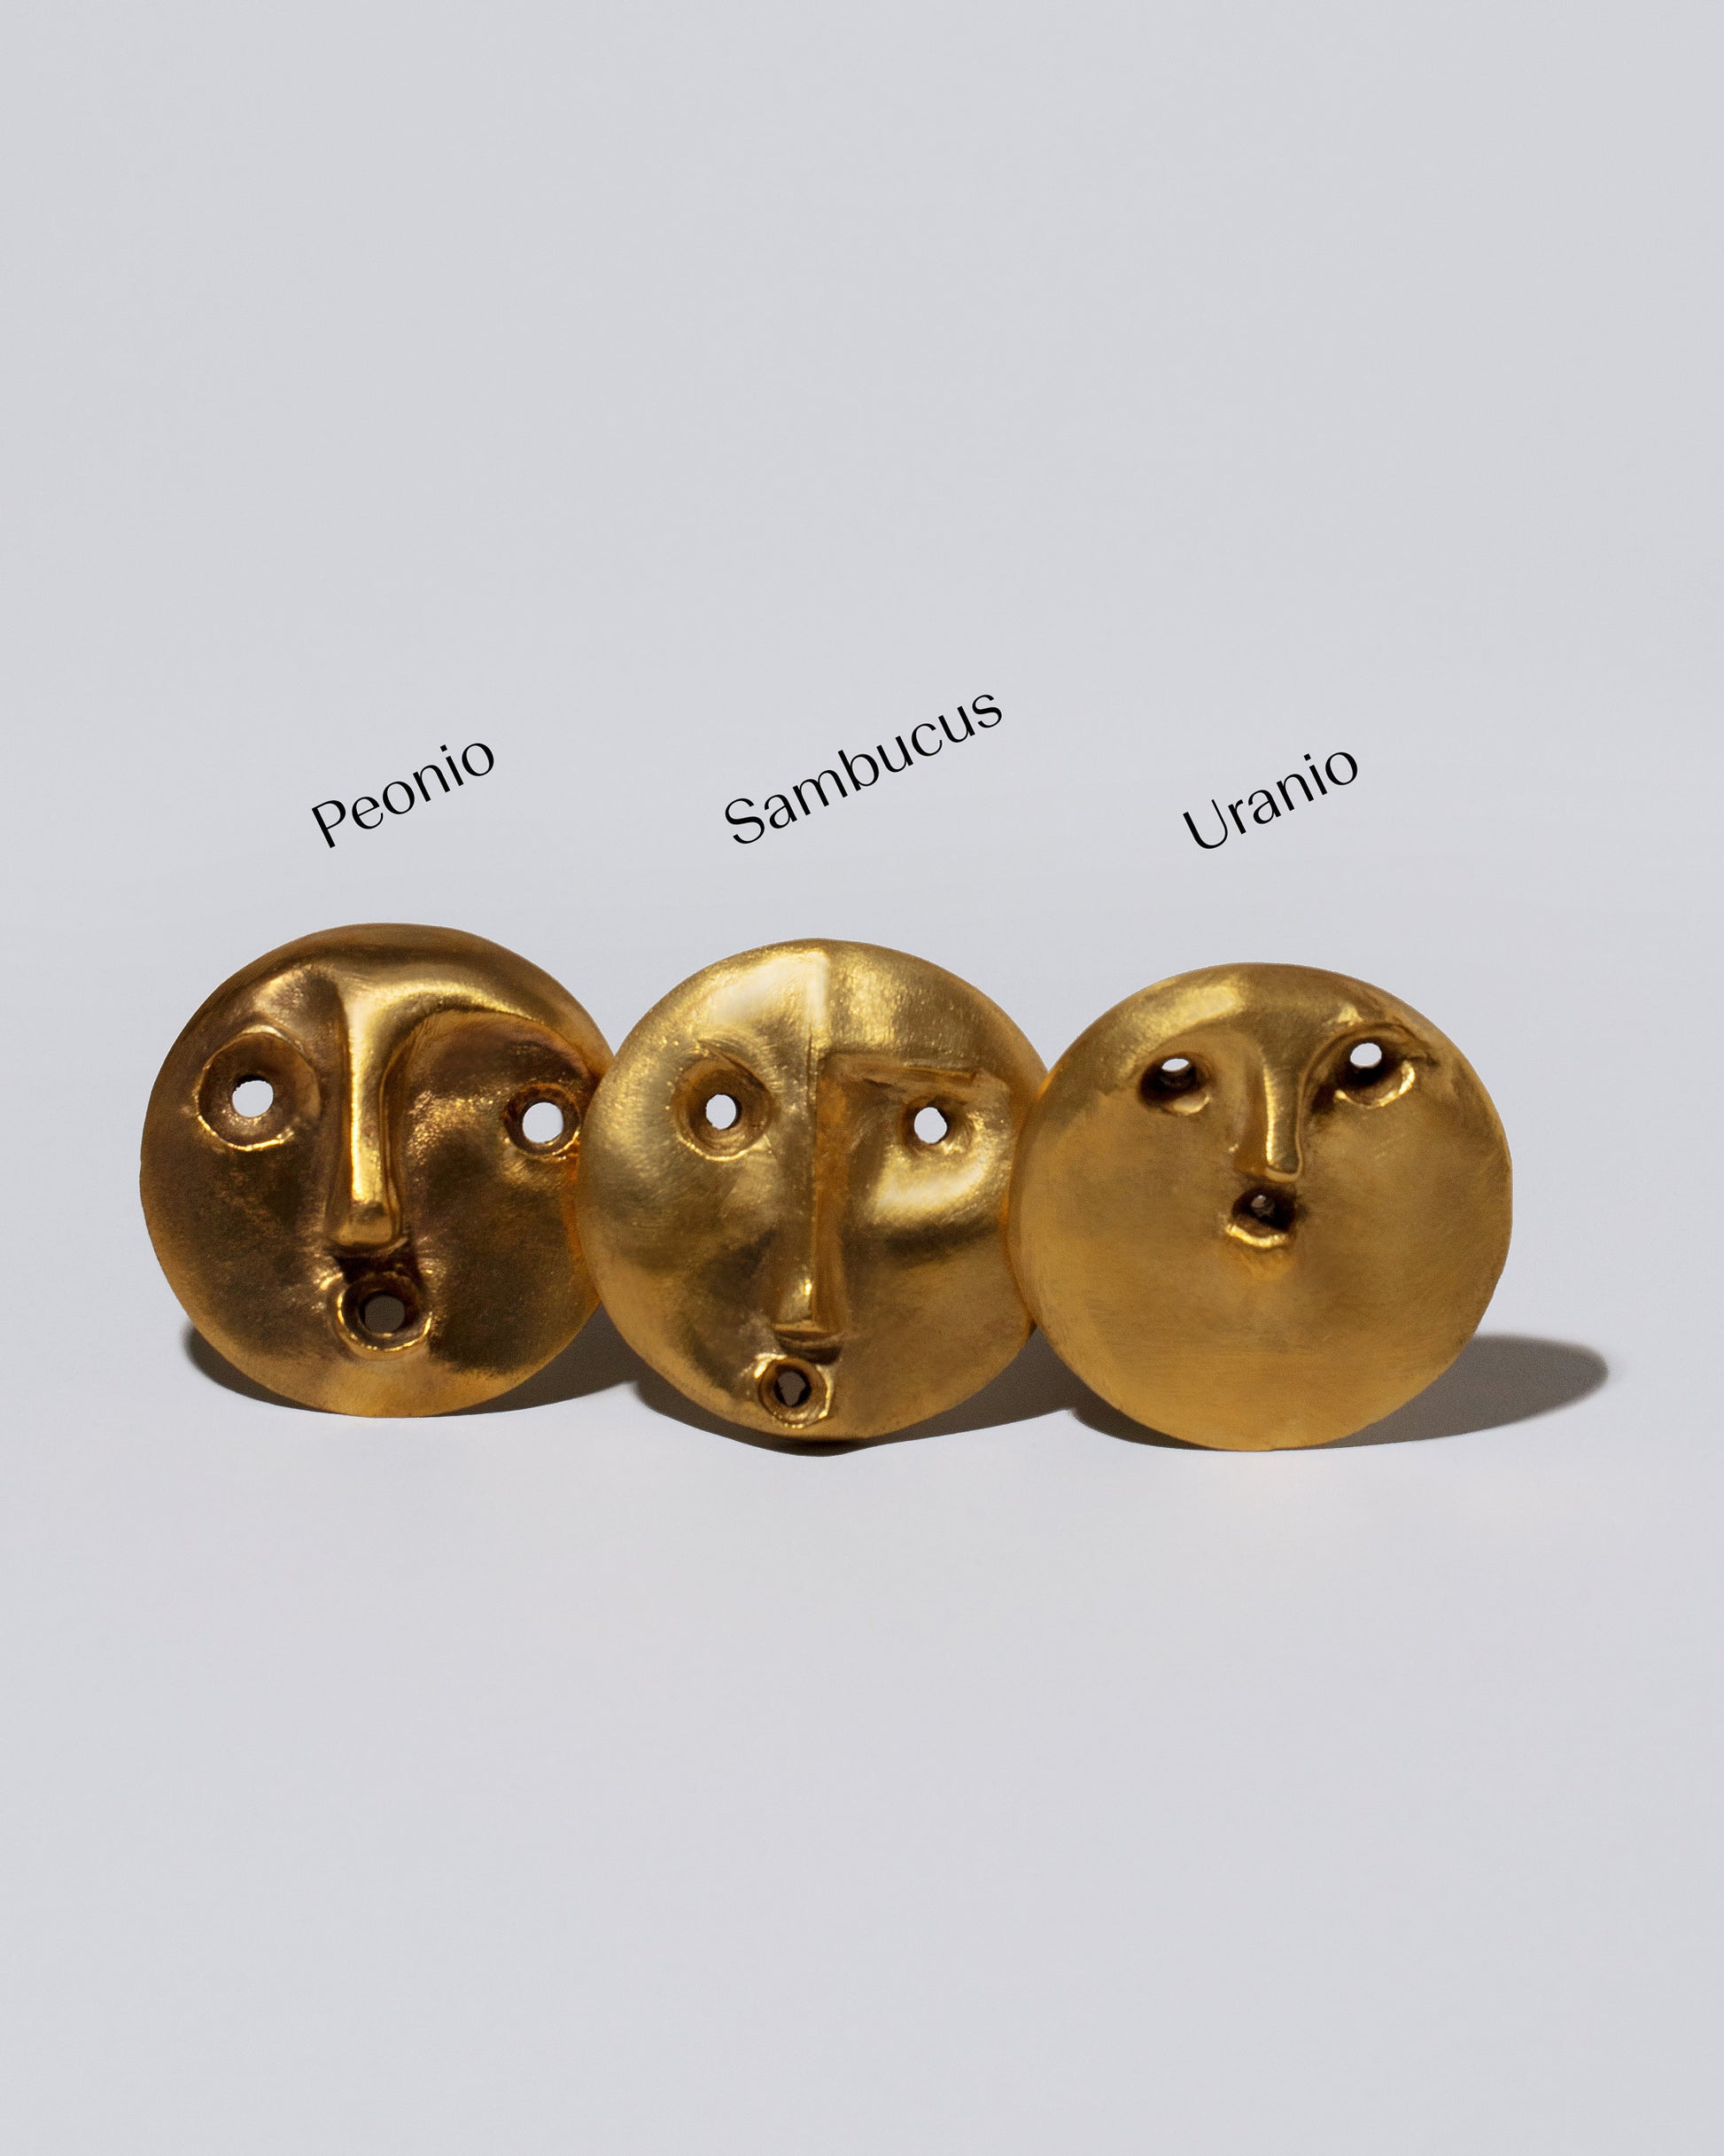 Group of Carl Auböck Peonio, Sambucus and Uranio Brass Face Bottle Stoppers on light color background.